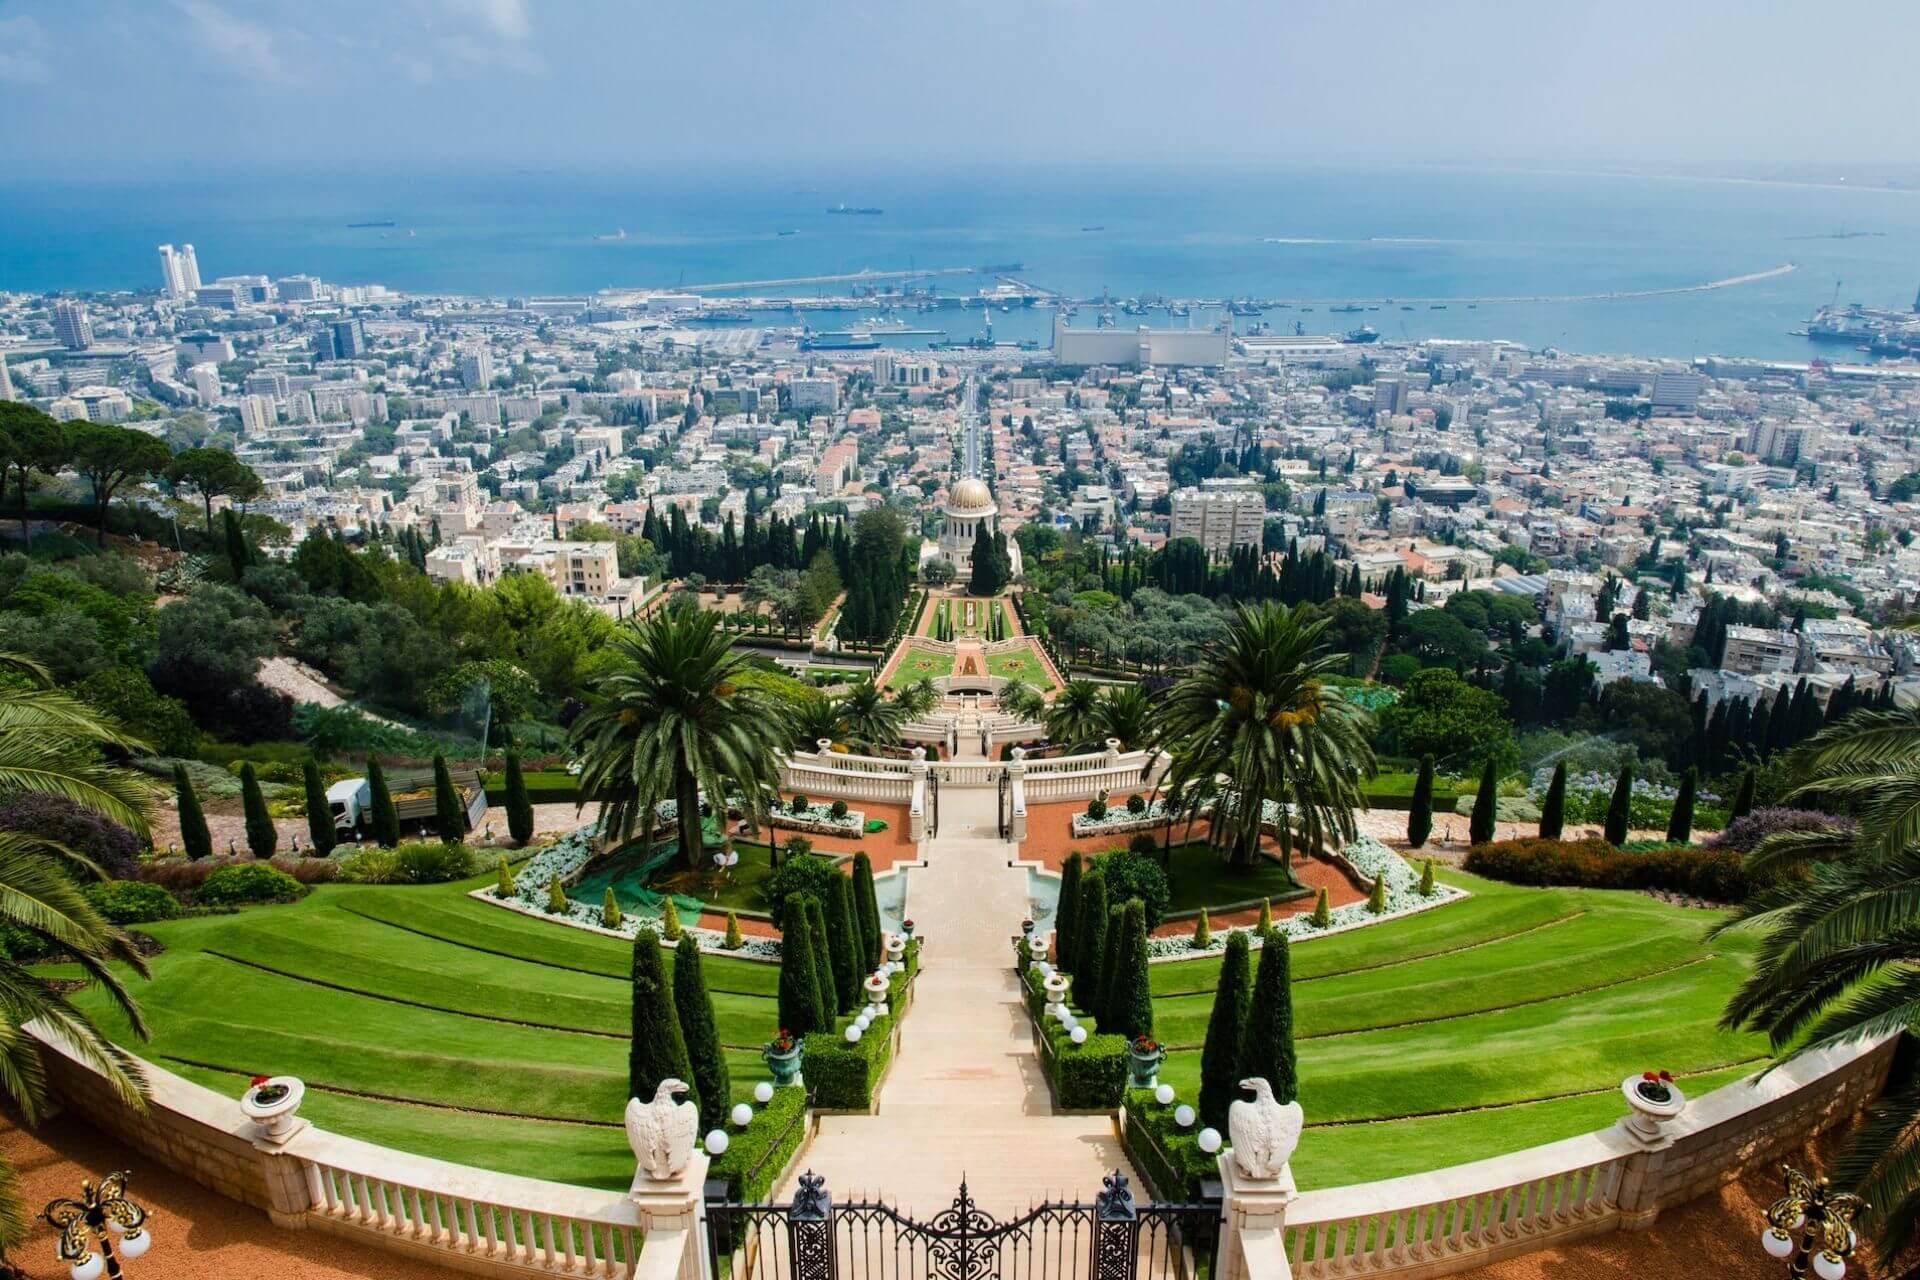 View of a park and town in Haifa District in Israel